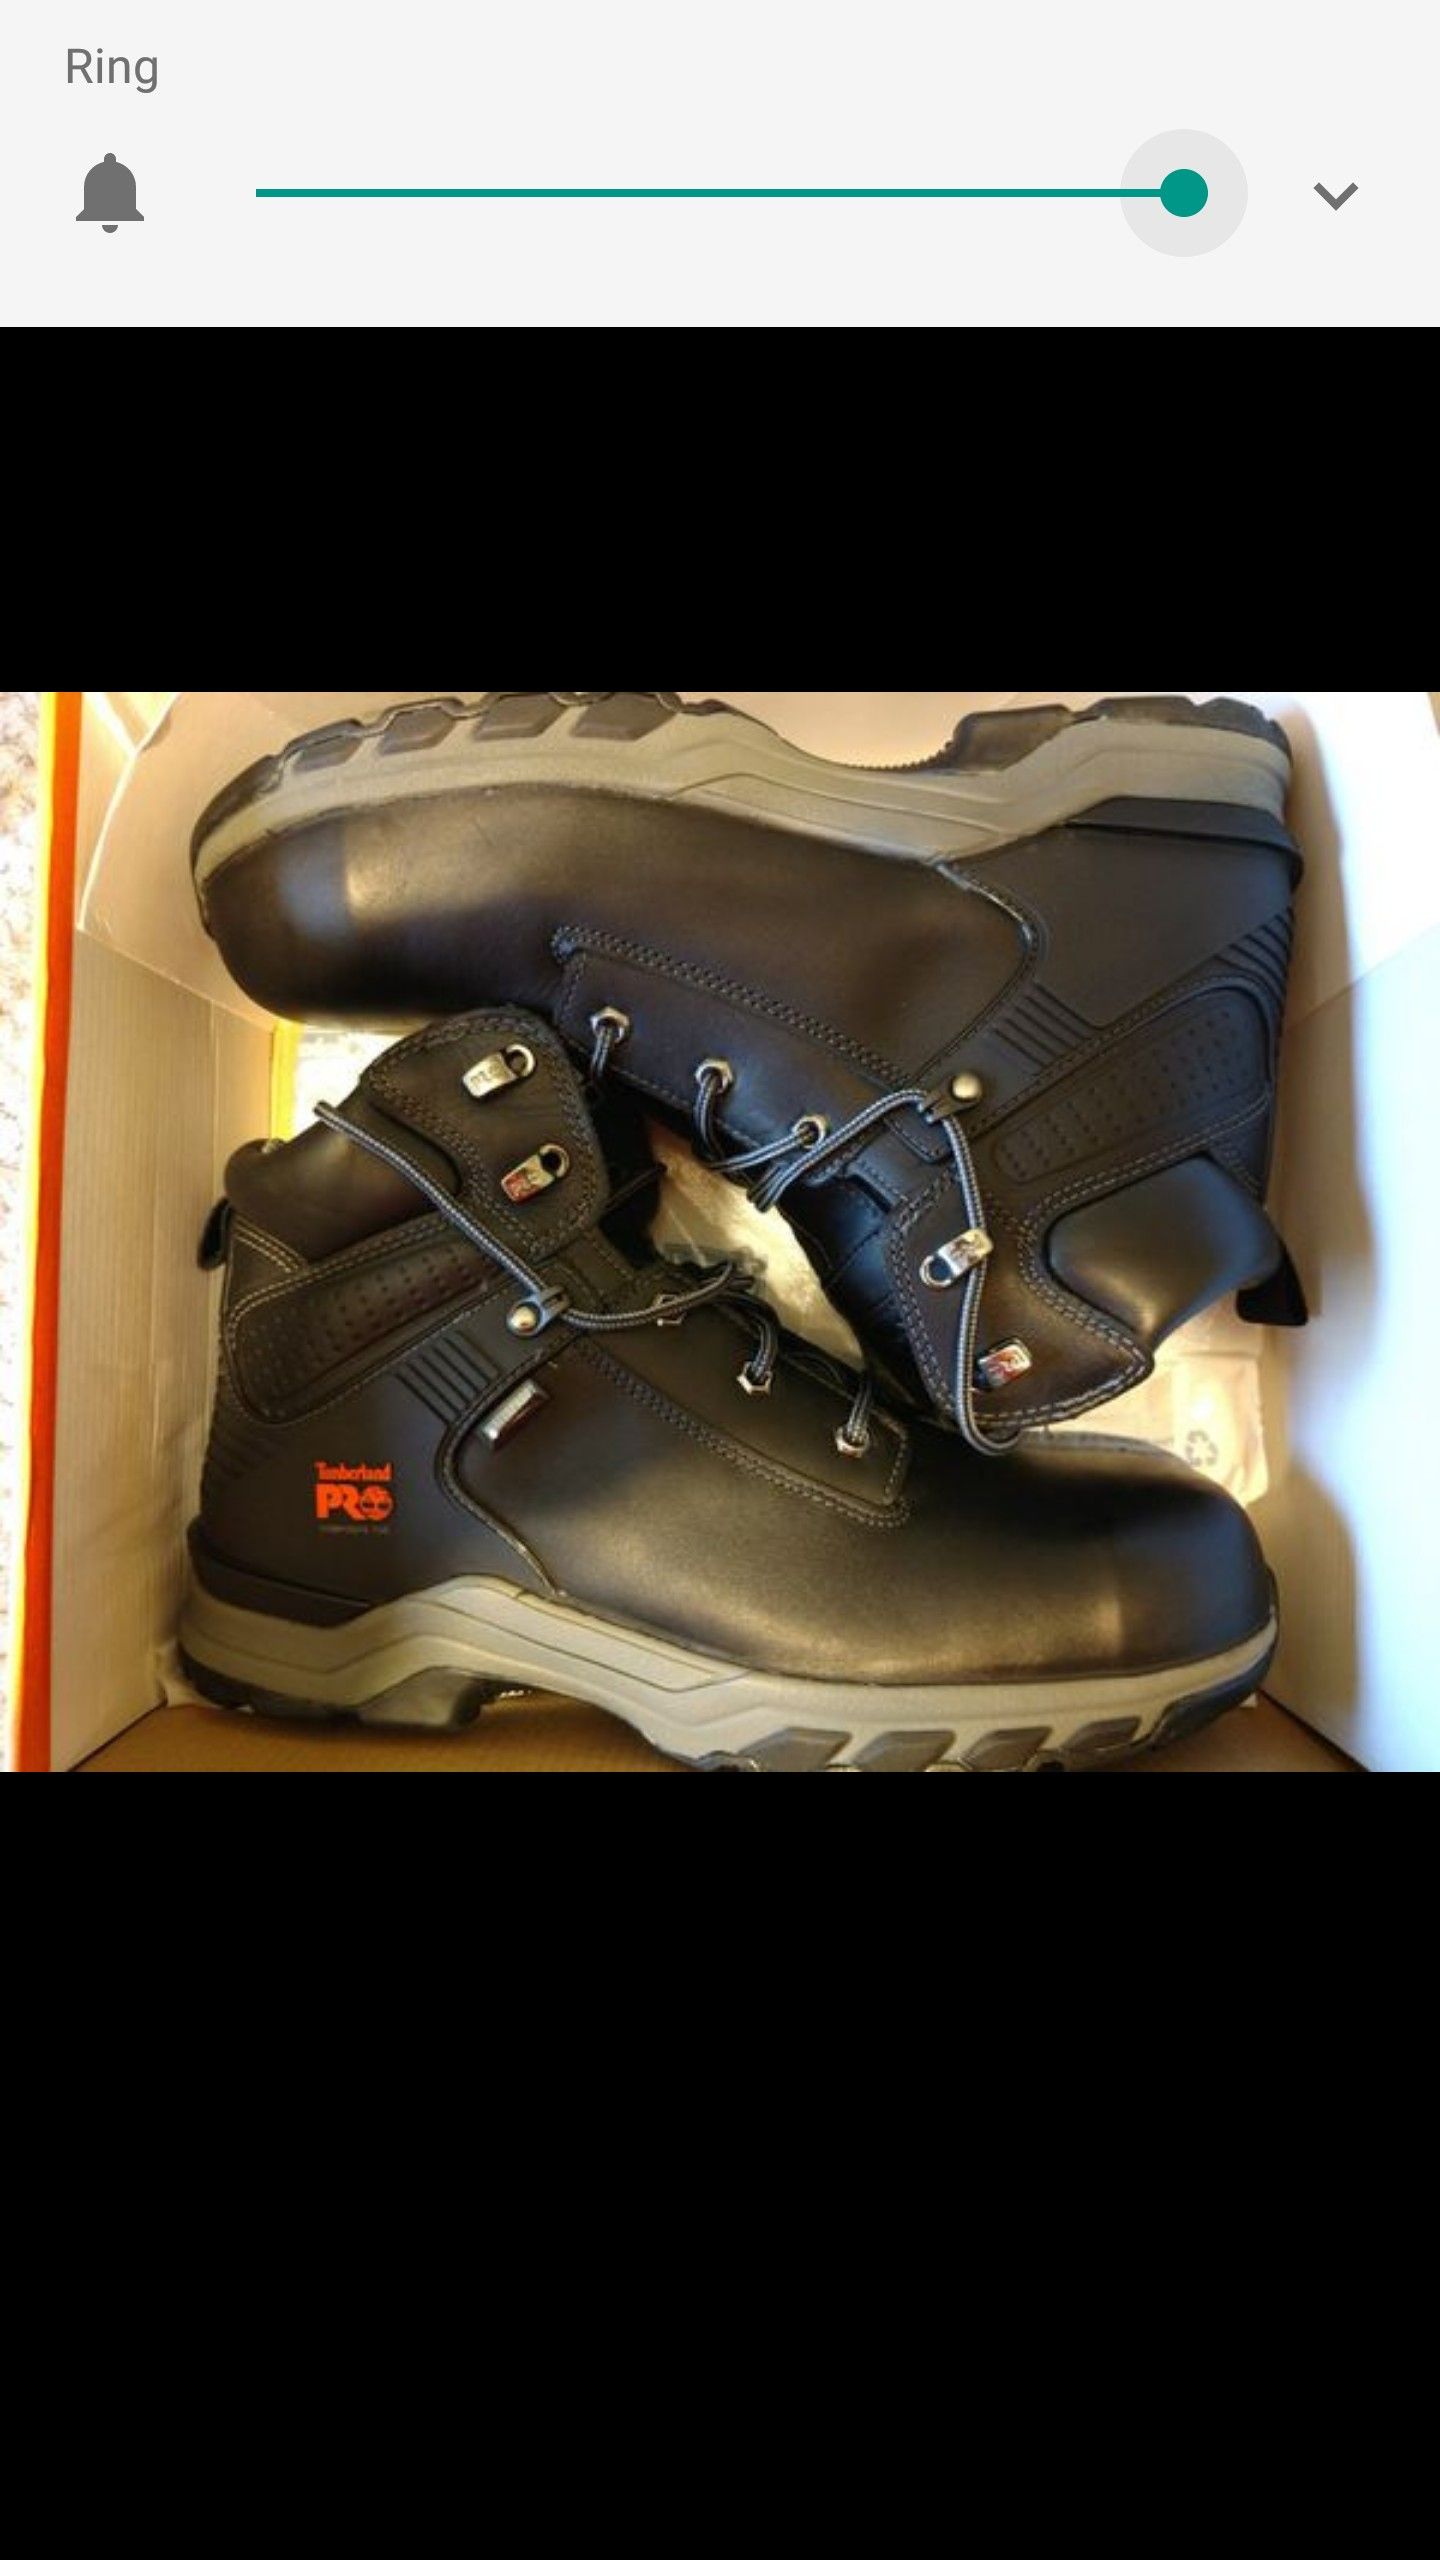 Timberland Pro Steel Toe Boots Size 11.5 (Brand New)